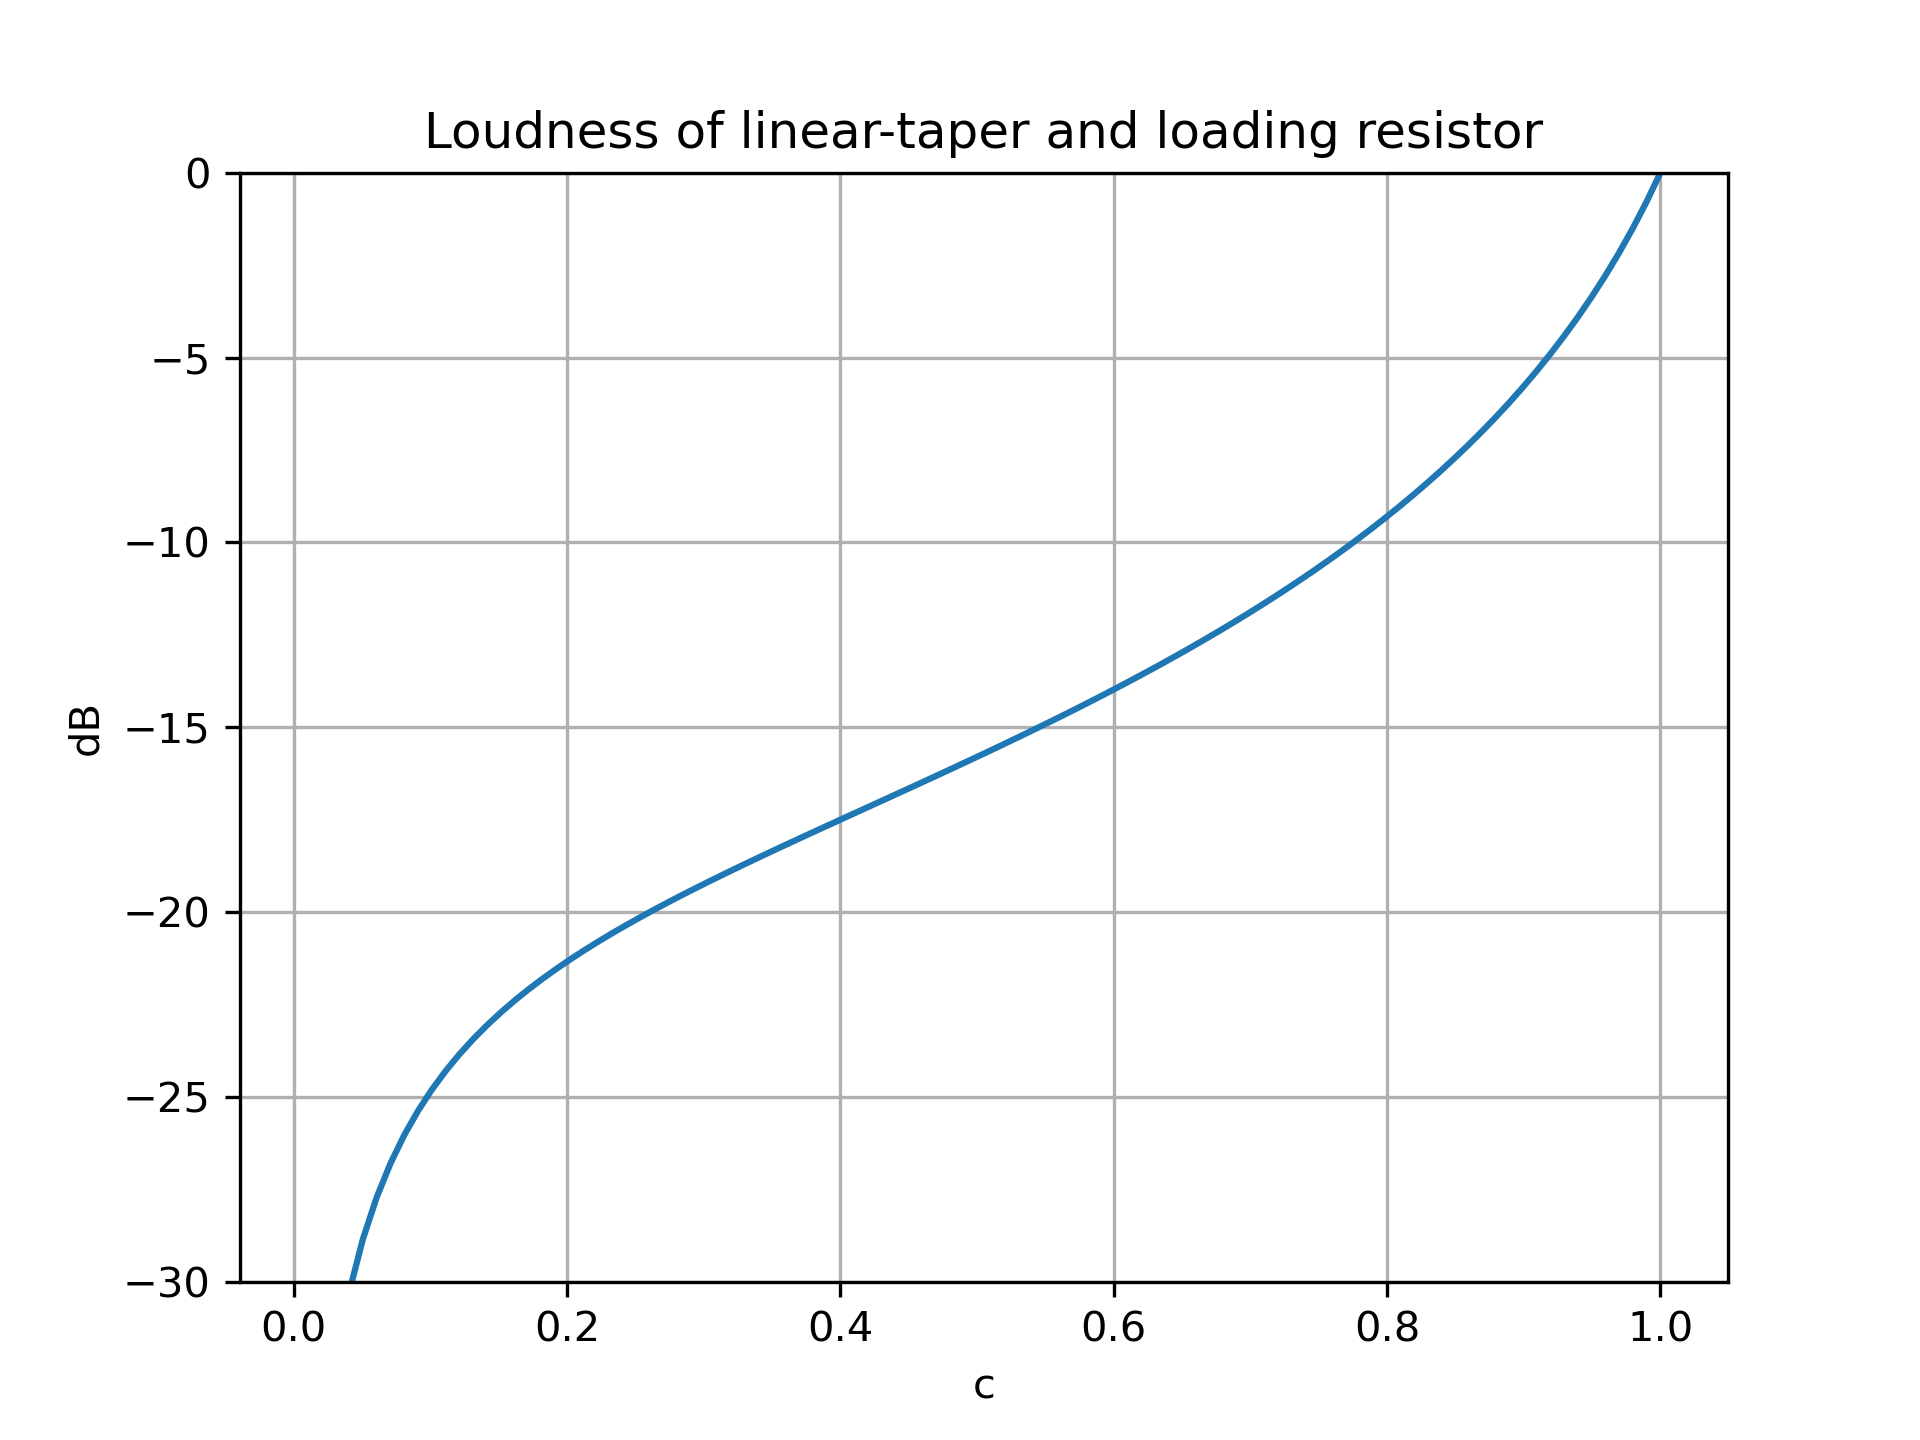 perceived loudness of linear taper and loading resistor in dB